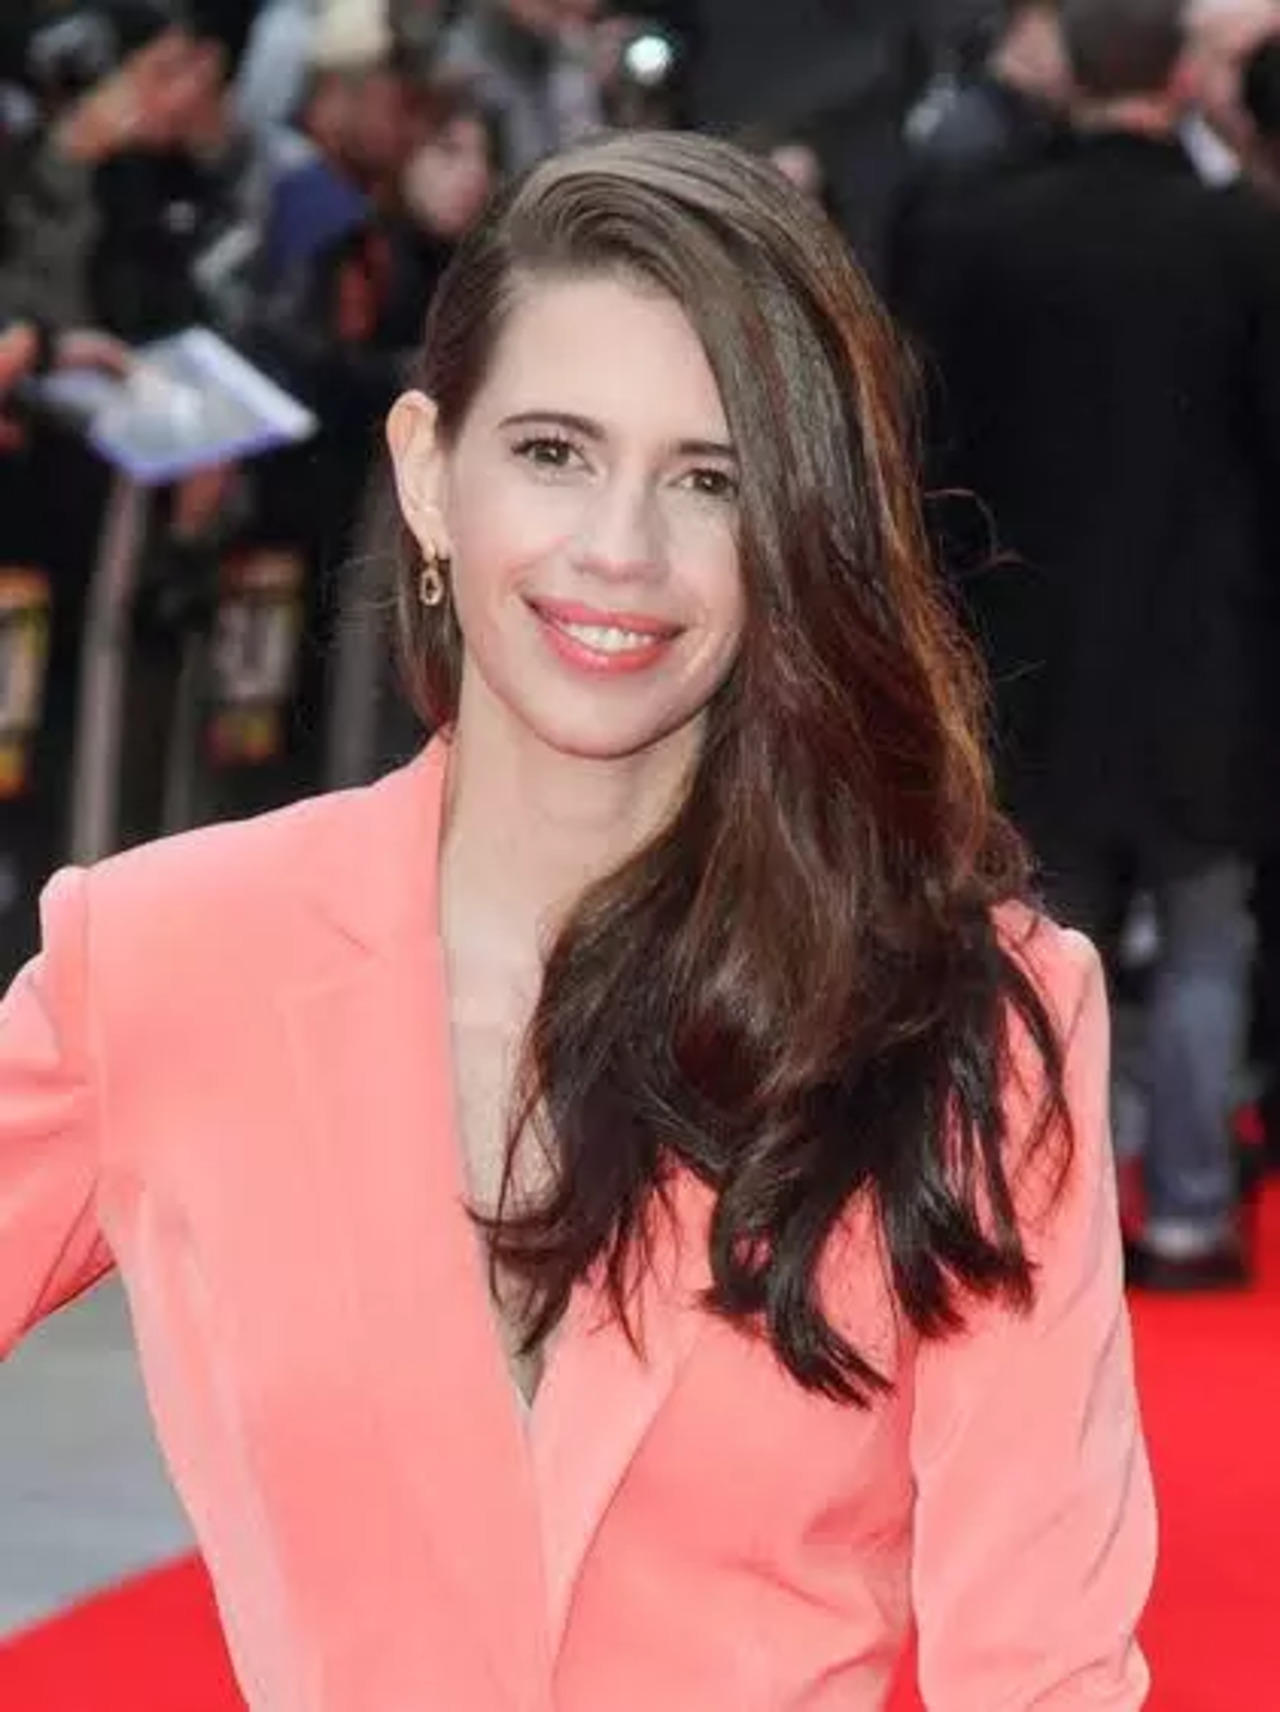 Kalki Koechlin and Hidesign team up for a line of sustainable